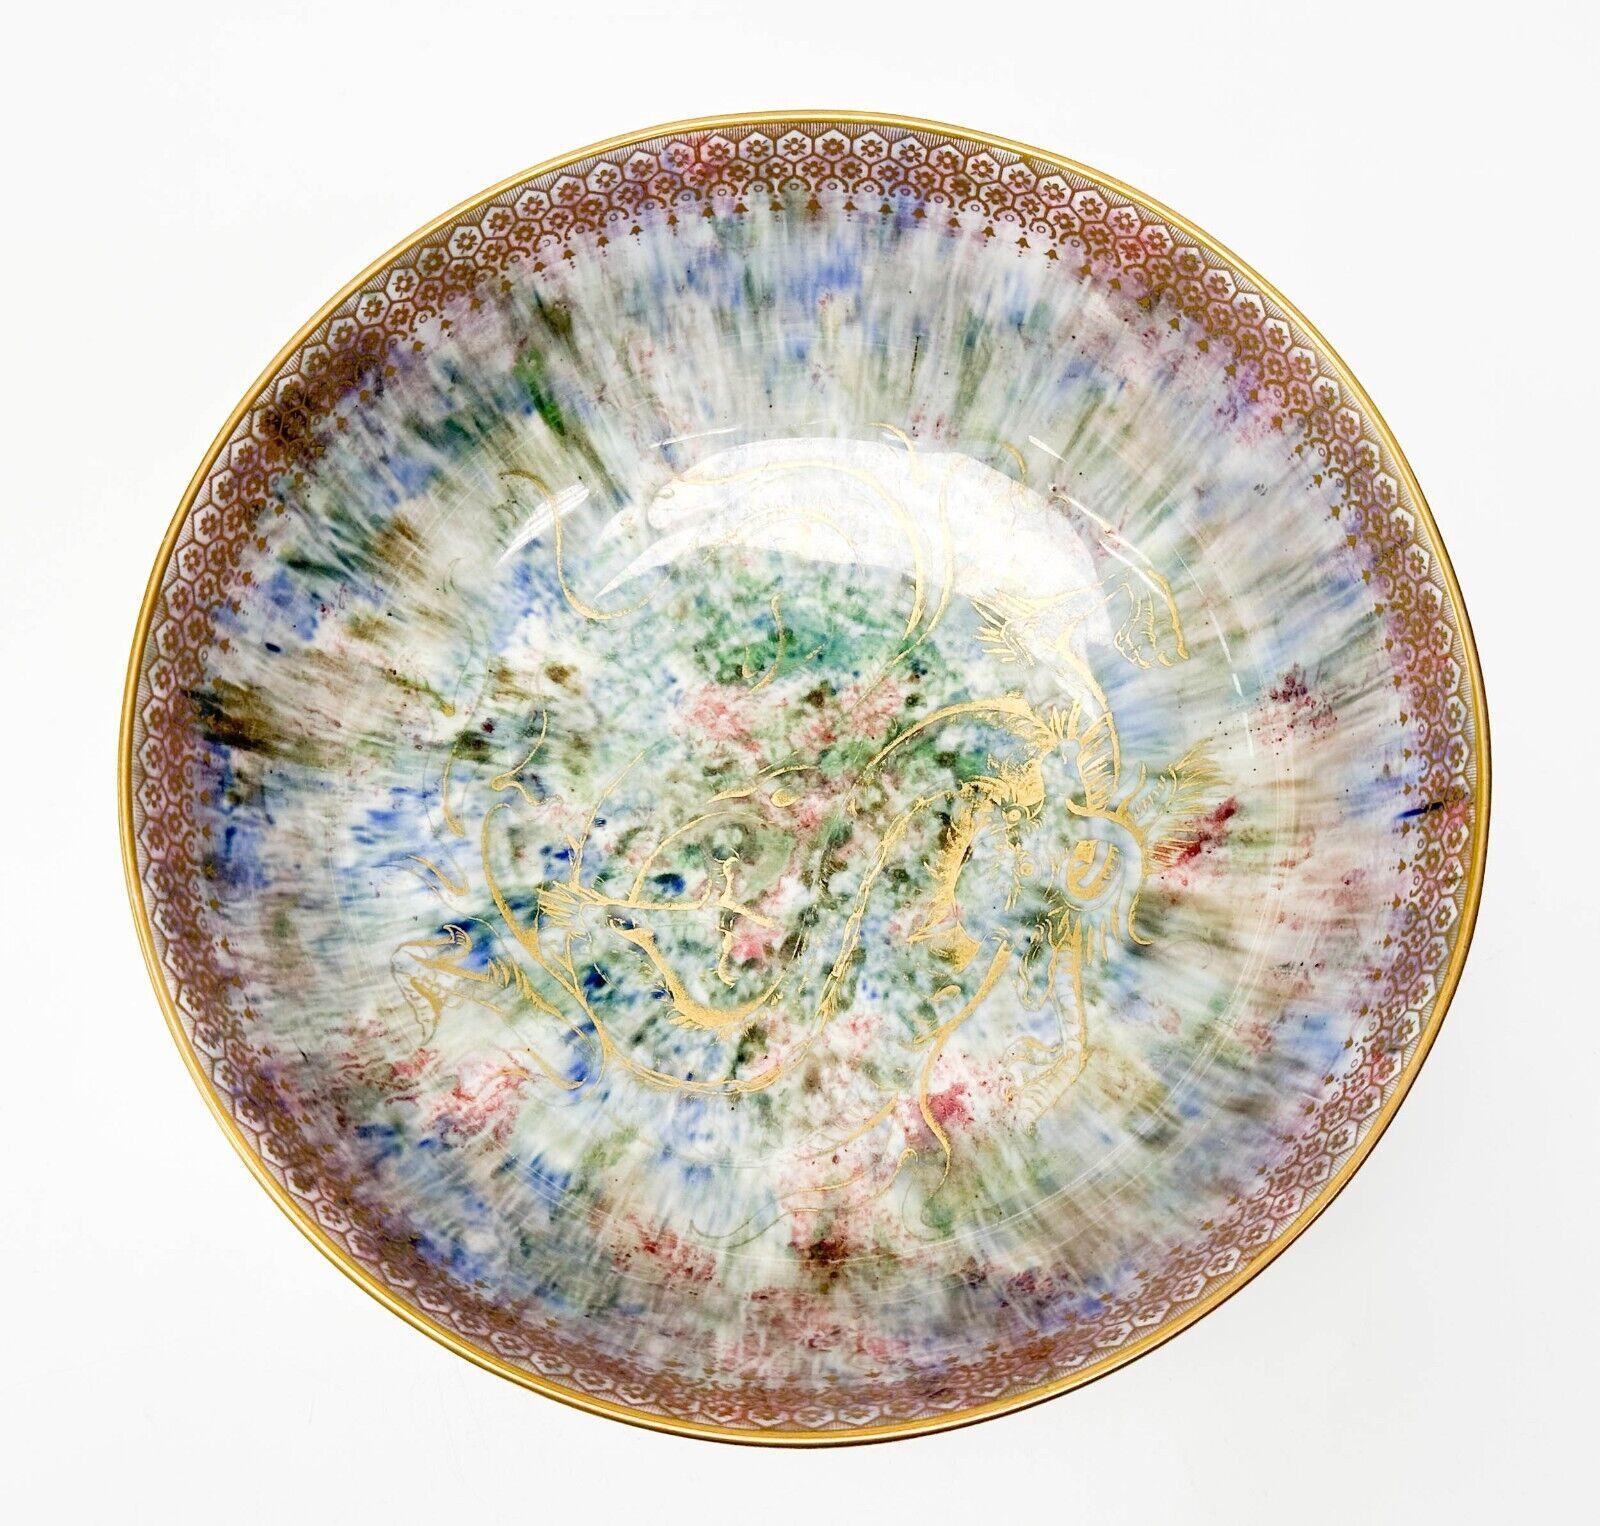  Wedgwood England porcelain bowl. A mottled orange exterior, mottled blue green and red interior. An iridescent finish, decorated with gilt dragons. Underside marked Wedgwood England Z4824

Additional Information:
Material: Porcelain 
Type: